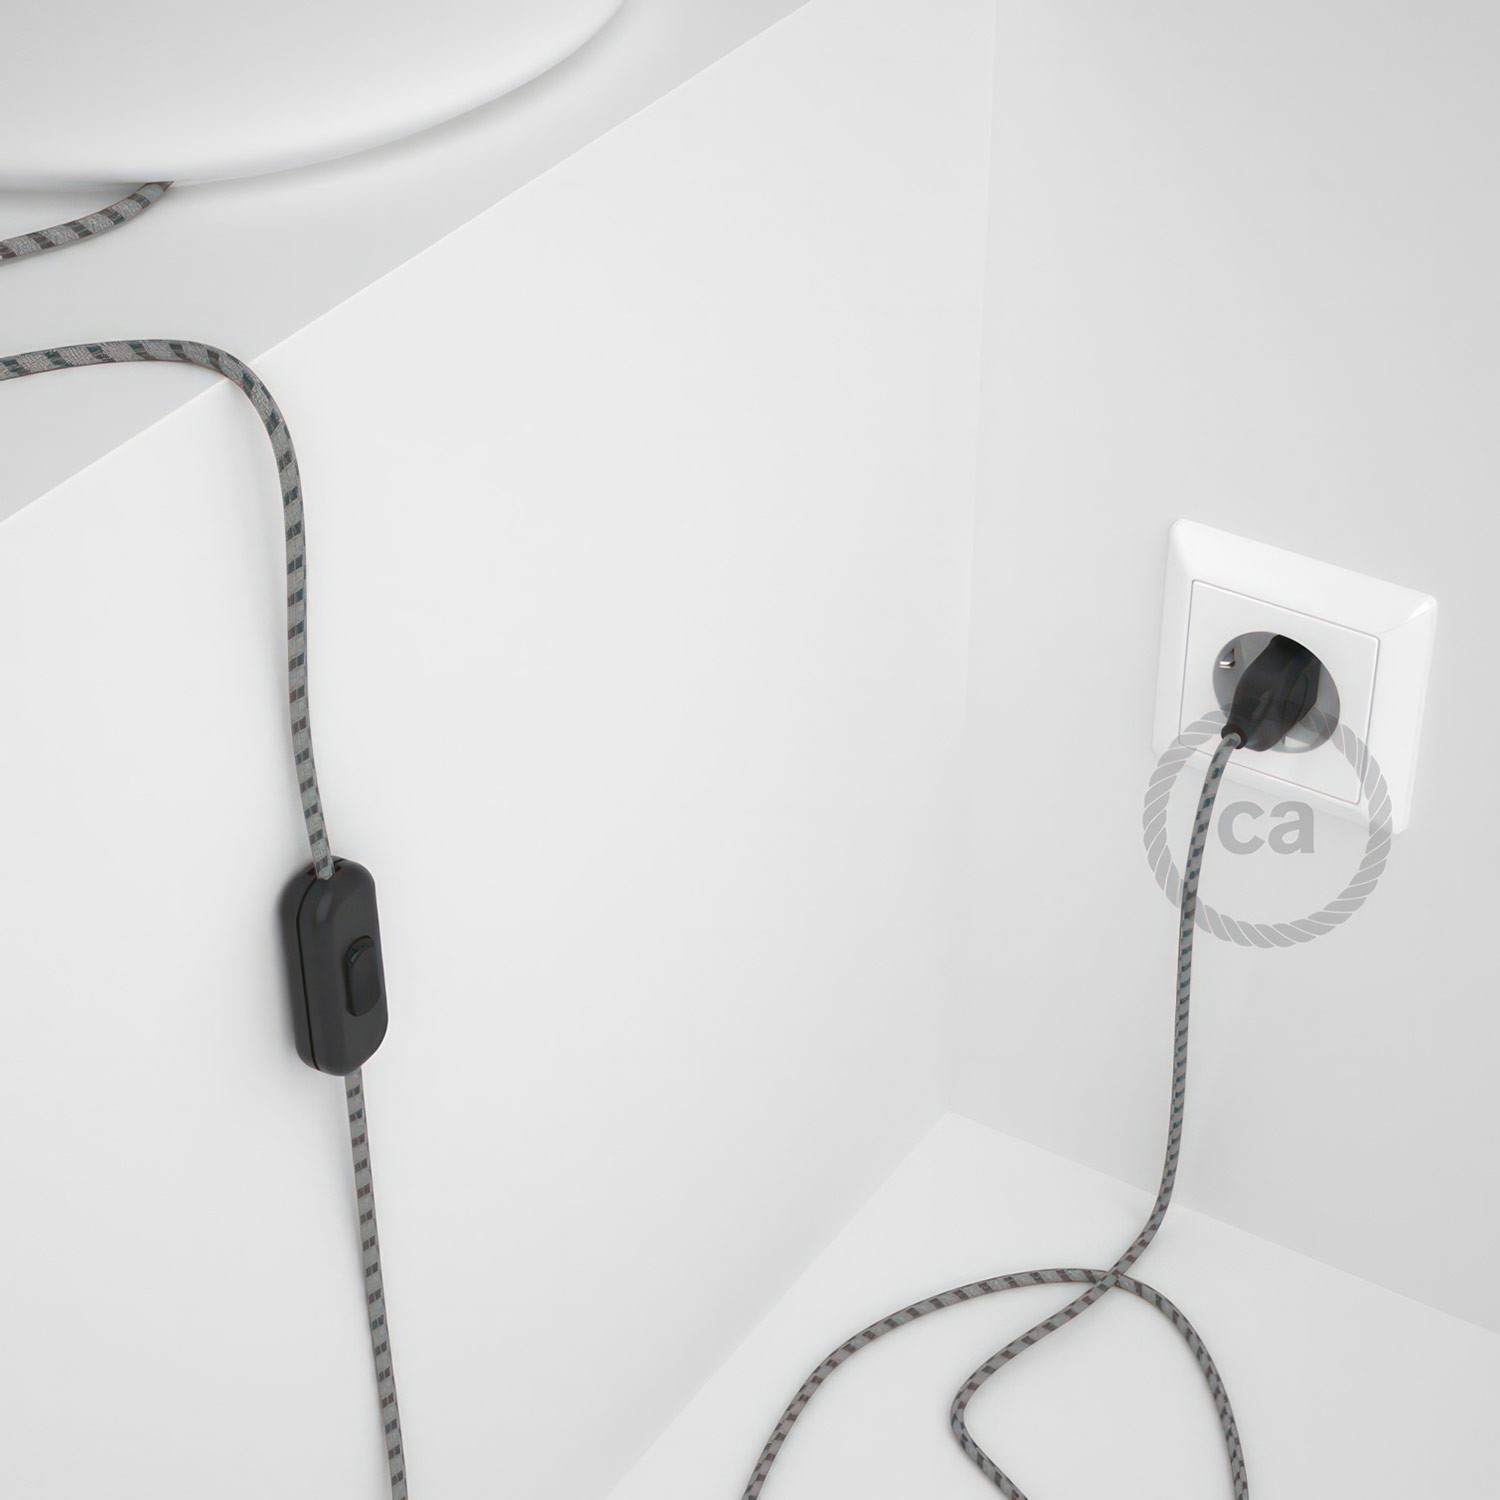 Lamp wiring, RD54 Anthracite Stripes Cotton and Natural Linen 1,80 m. Choose the colour of the switch and plug.